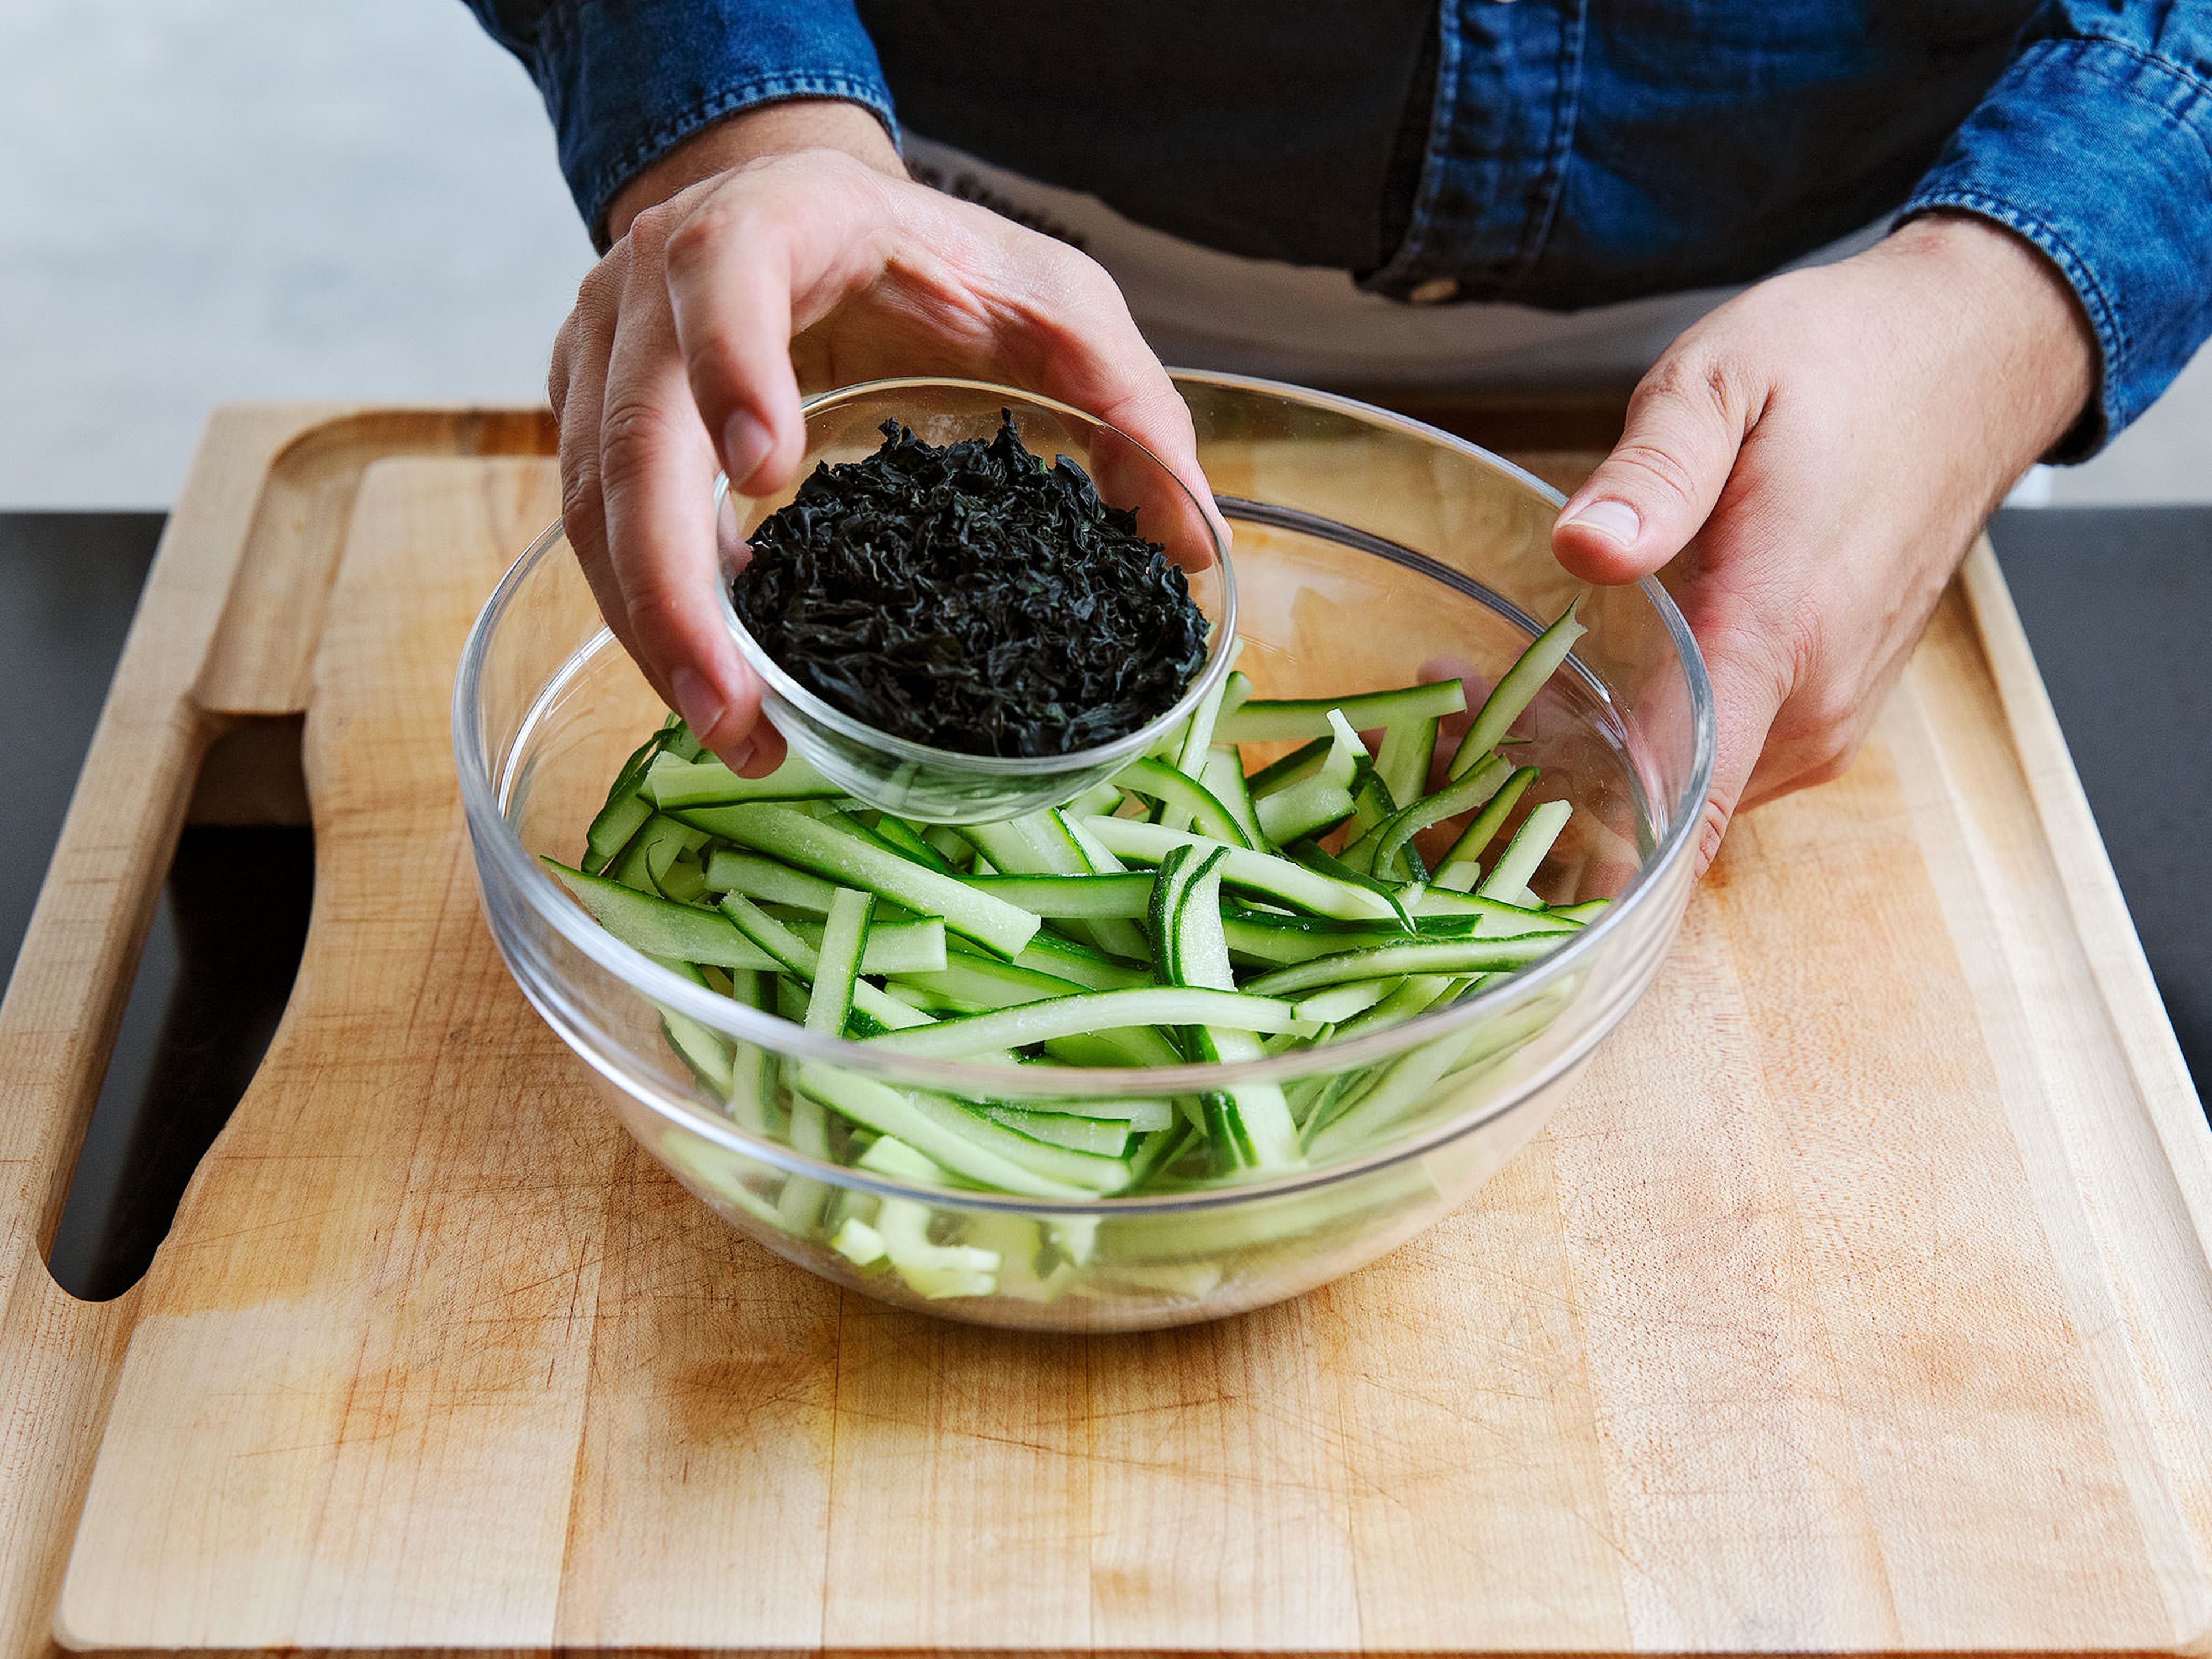 To prepare the salad, slice cucumbers and transfer to a bowl. Stir in some salt and edible seaweed.